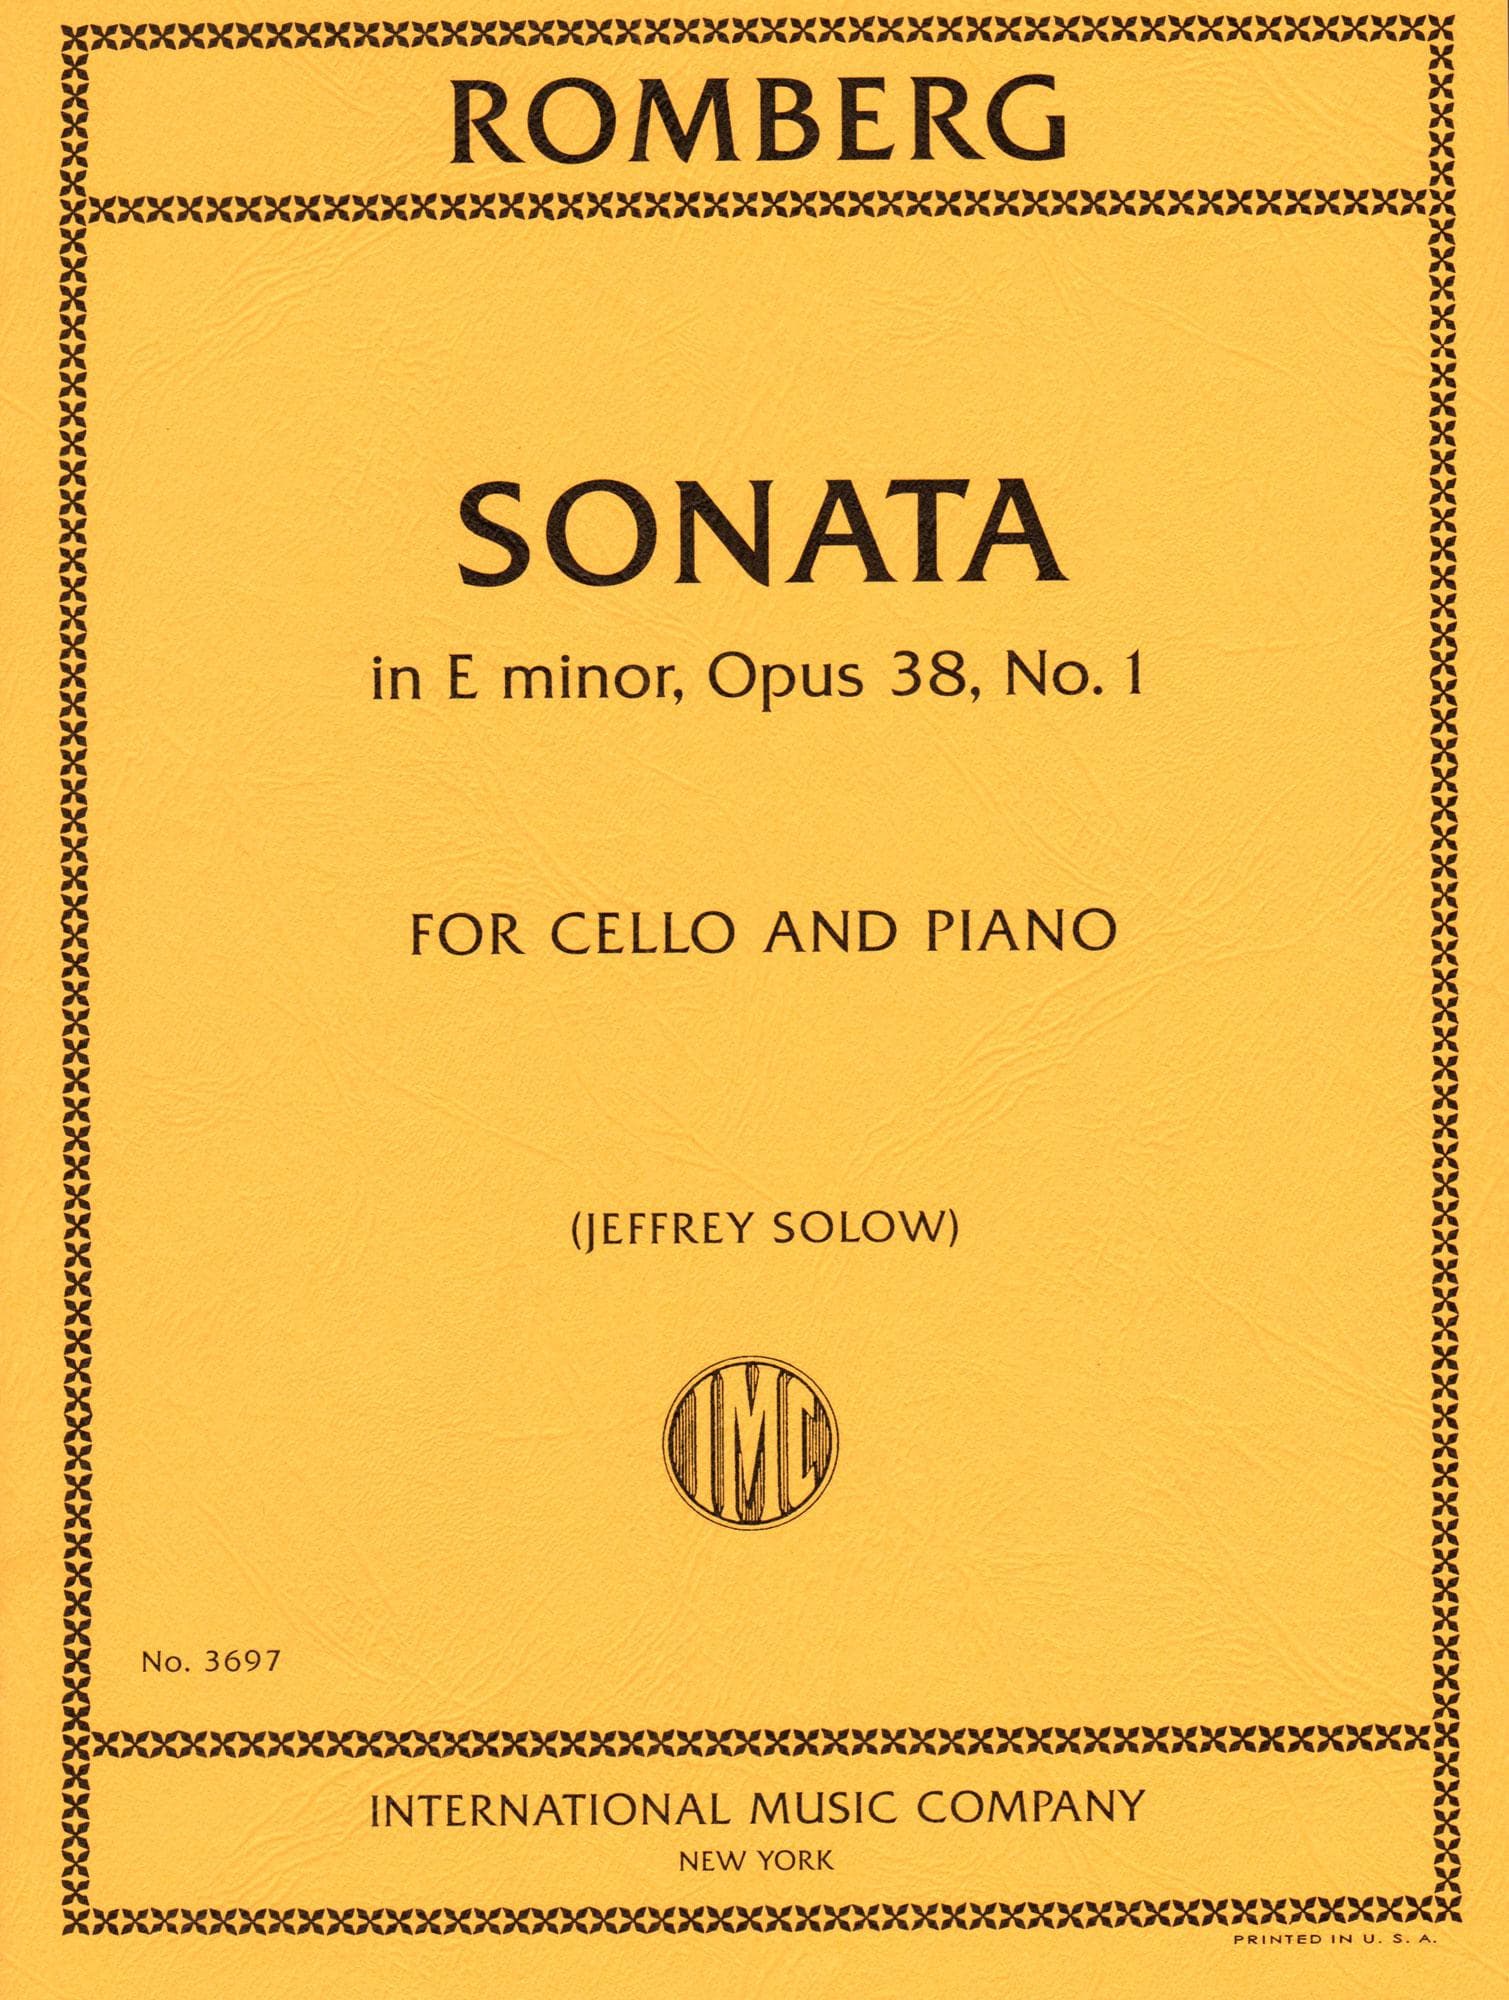 Romberg - Sonata In E Minor Op 38 No 1 - for Cello and Piano - edited by Jeffrey Solow - International Music Company